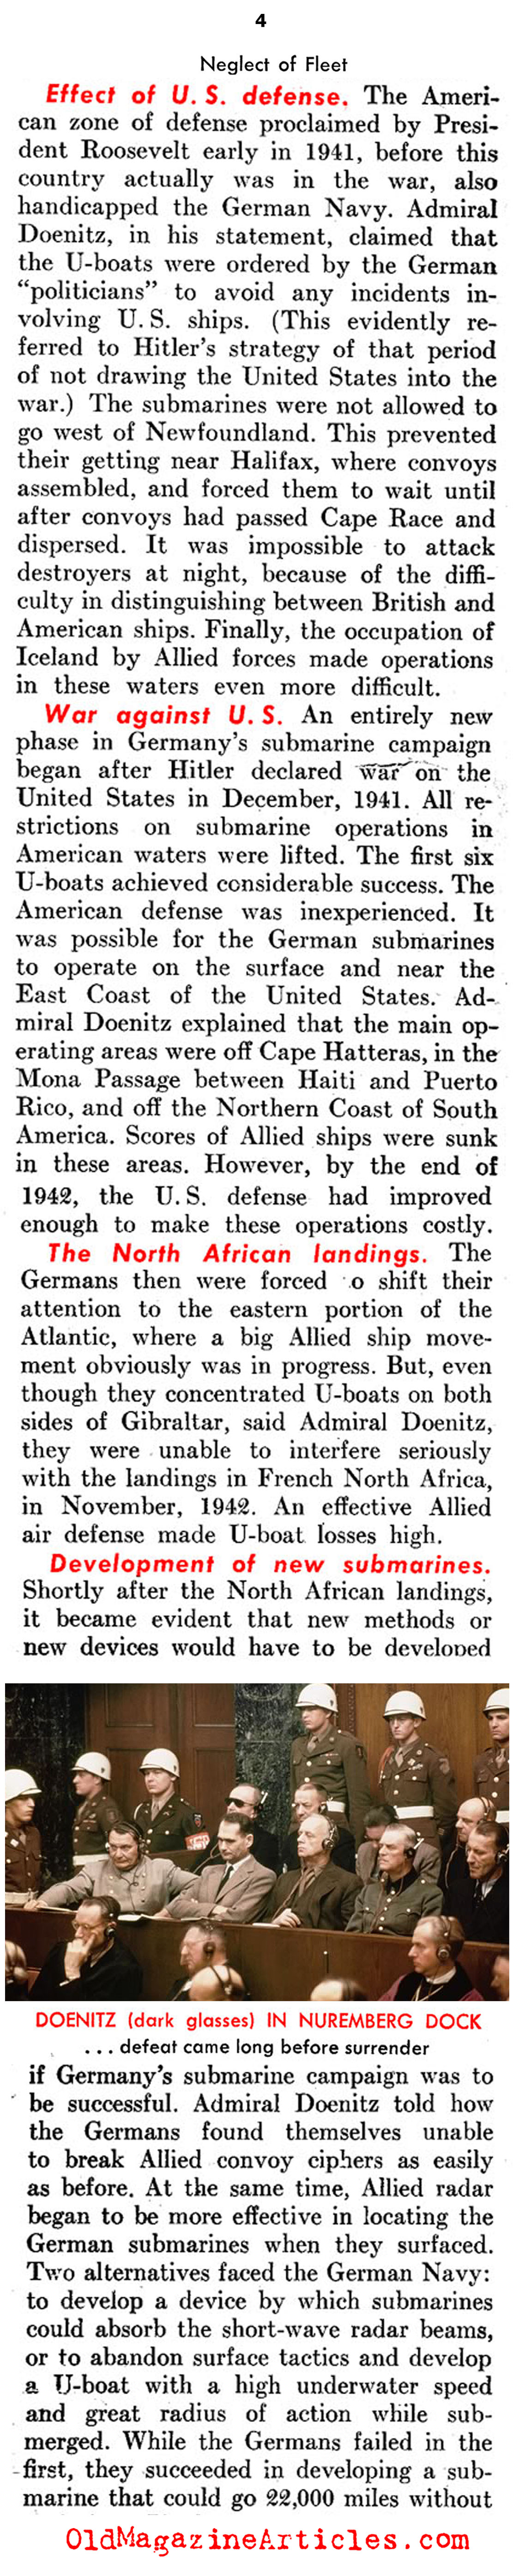 The Lack of German Naval Power (United States News, 1946)